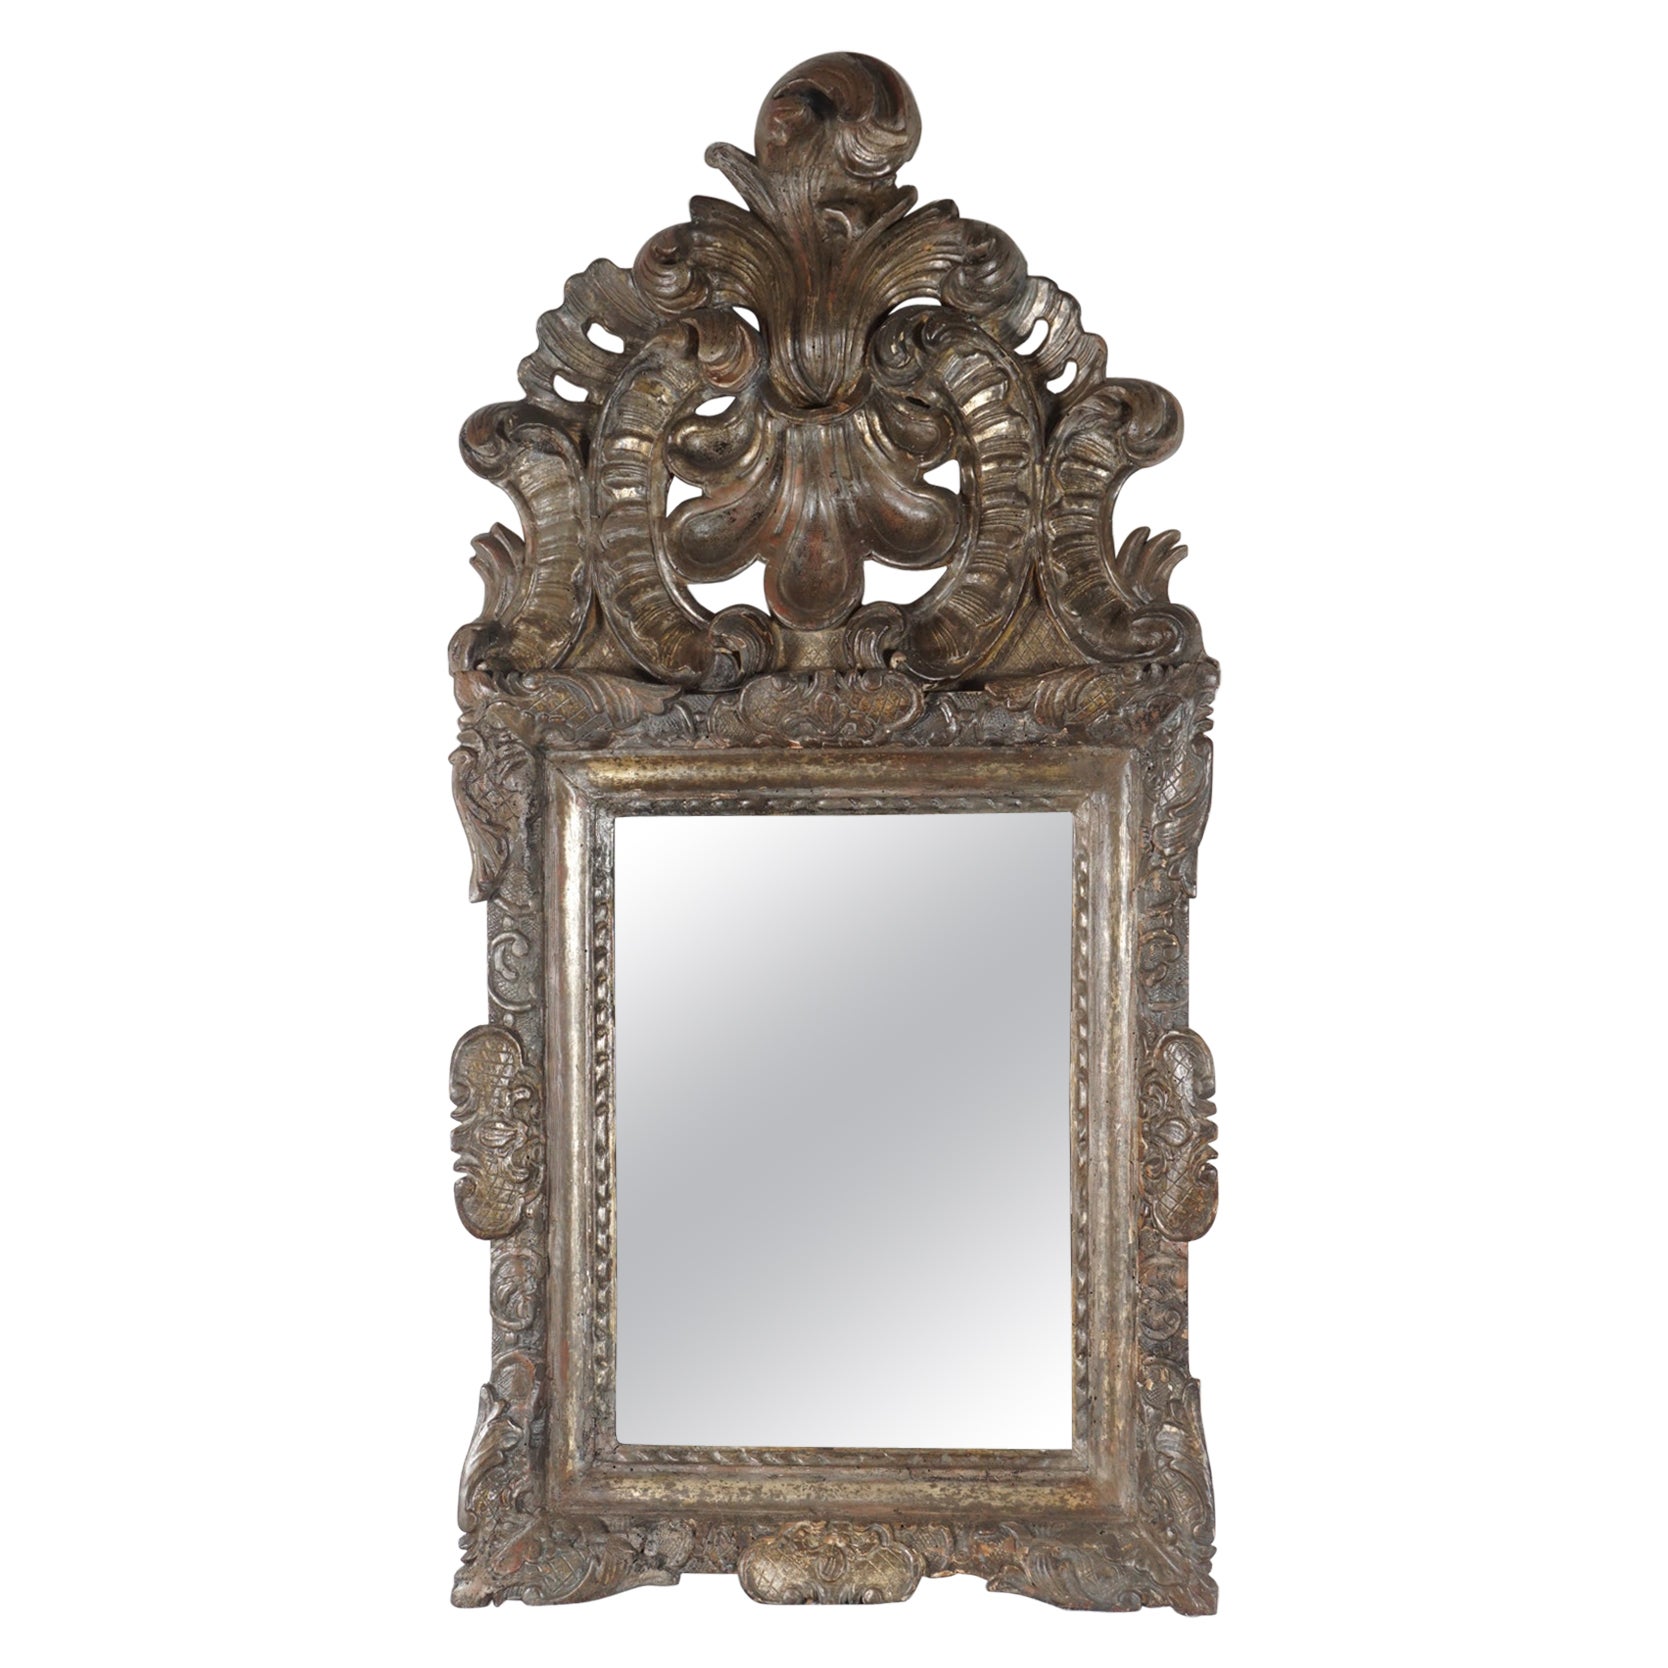 Period Dutch Baroque Silver Gilt Carved Wood Mirror For Sale